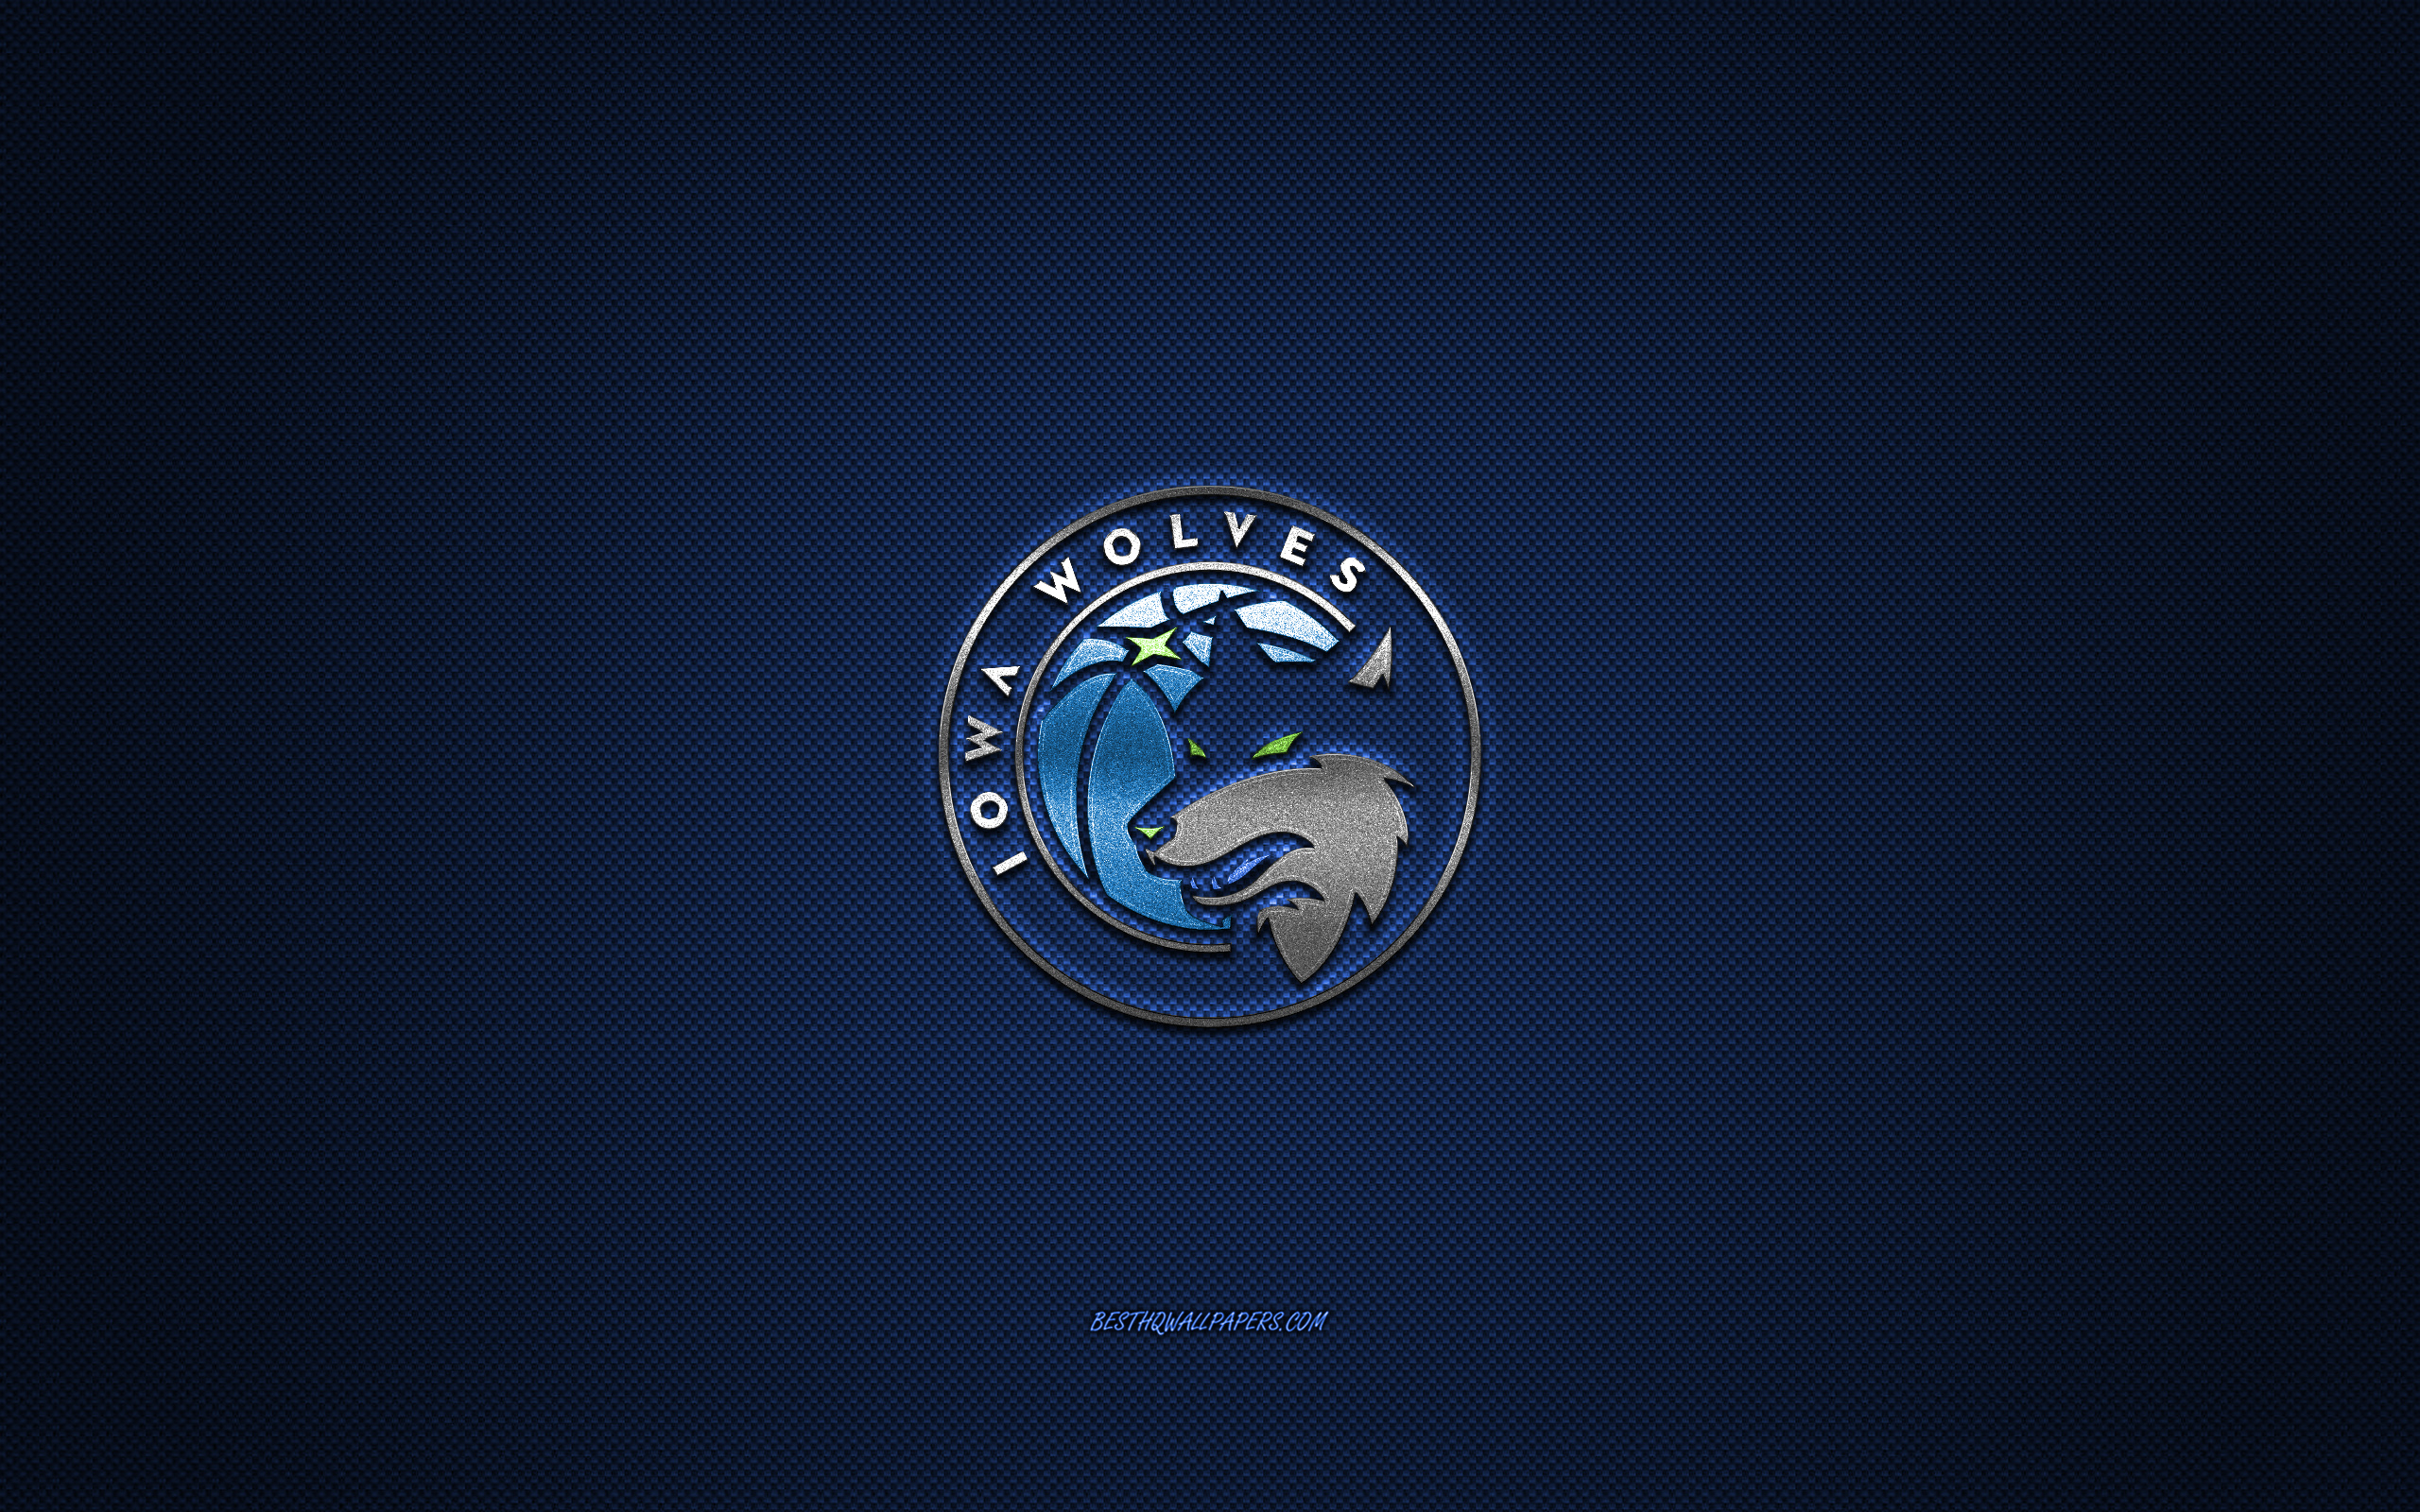 Download wallpaper Iowa Wolves, American basketball club, blue logo, blue carbon fiber background, NBA G League, basketball, Iowa, USA, Iowa Wolves logo for desktop with resolution 2560x1600. High Quality HD picture wallpaper